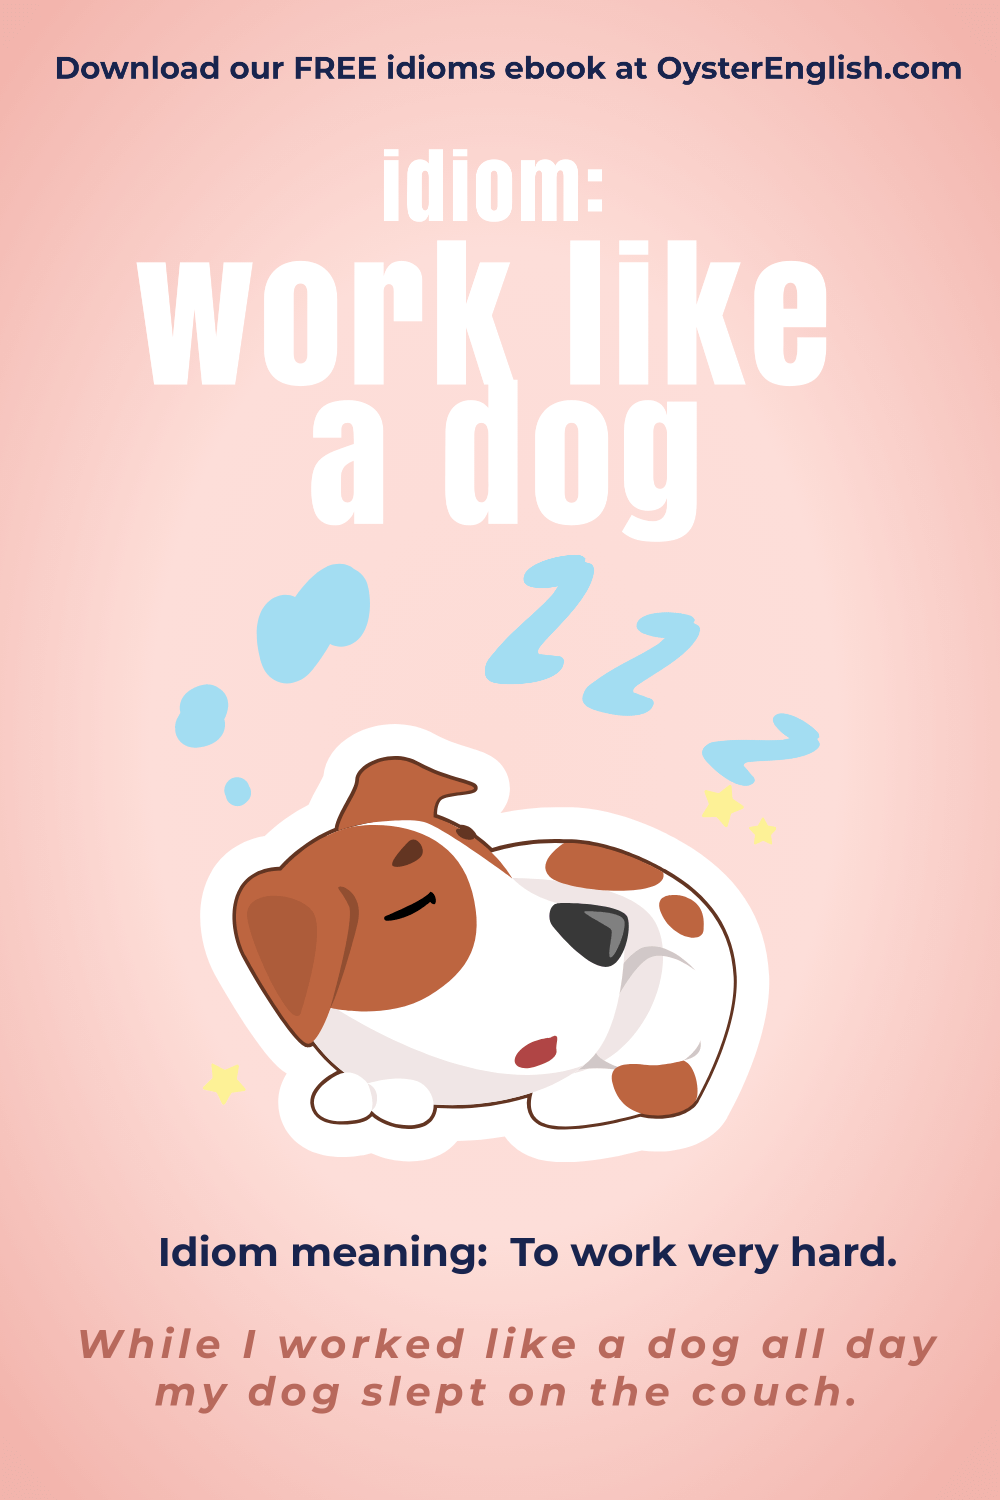 what does working like a dog mean